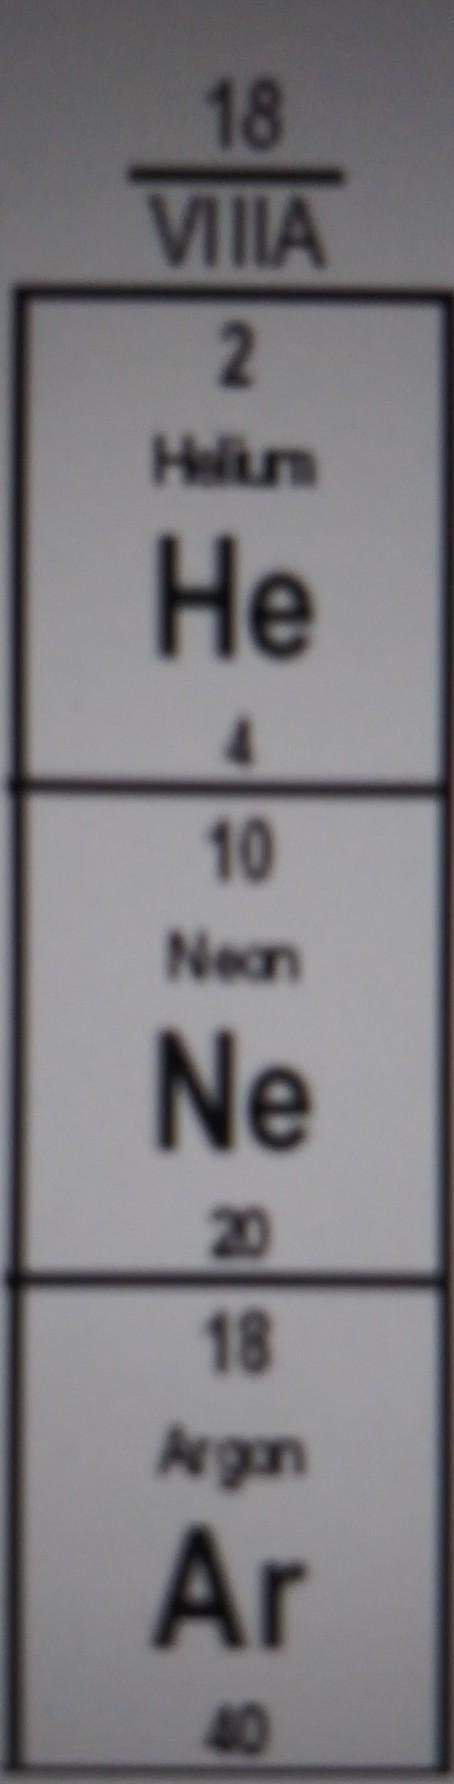 What is this section of the periodic table called